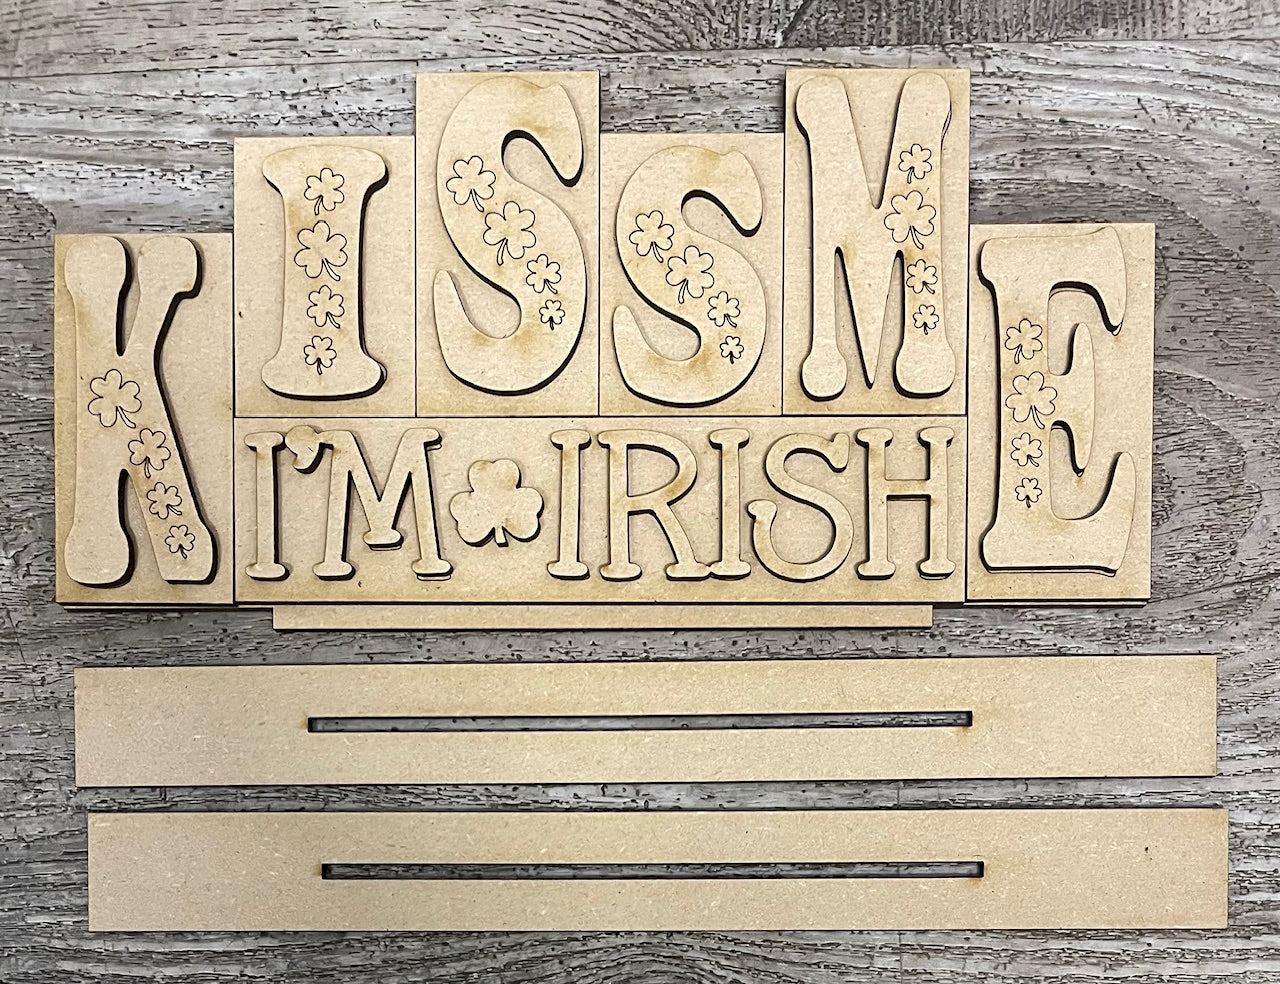 St. Patrick's Day word standers- wood pieces, unpainted wood cutouts, ready for you to paint